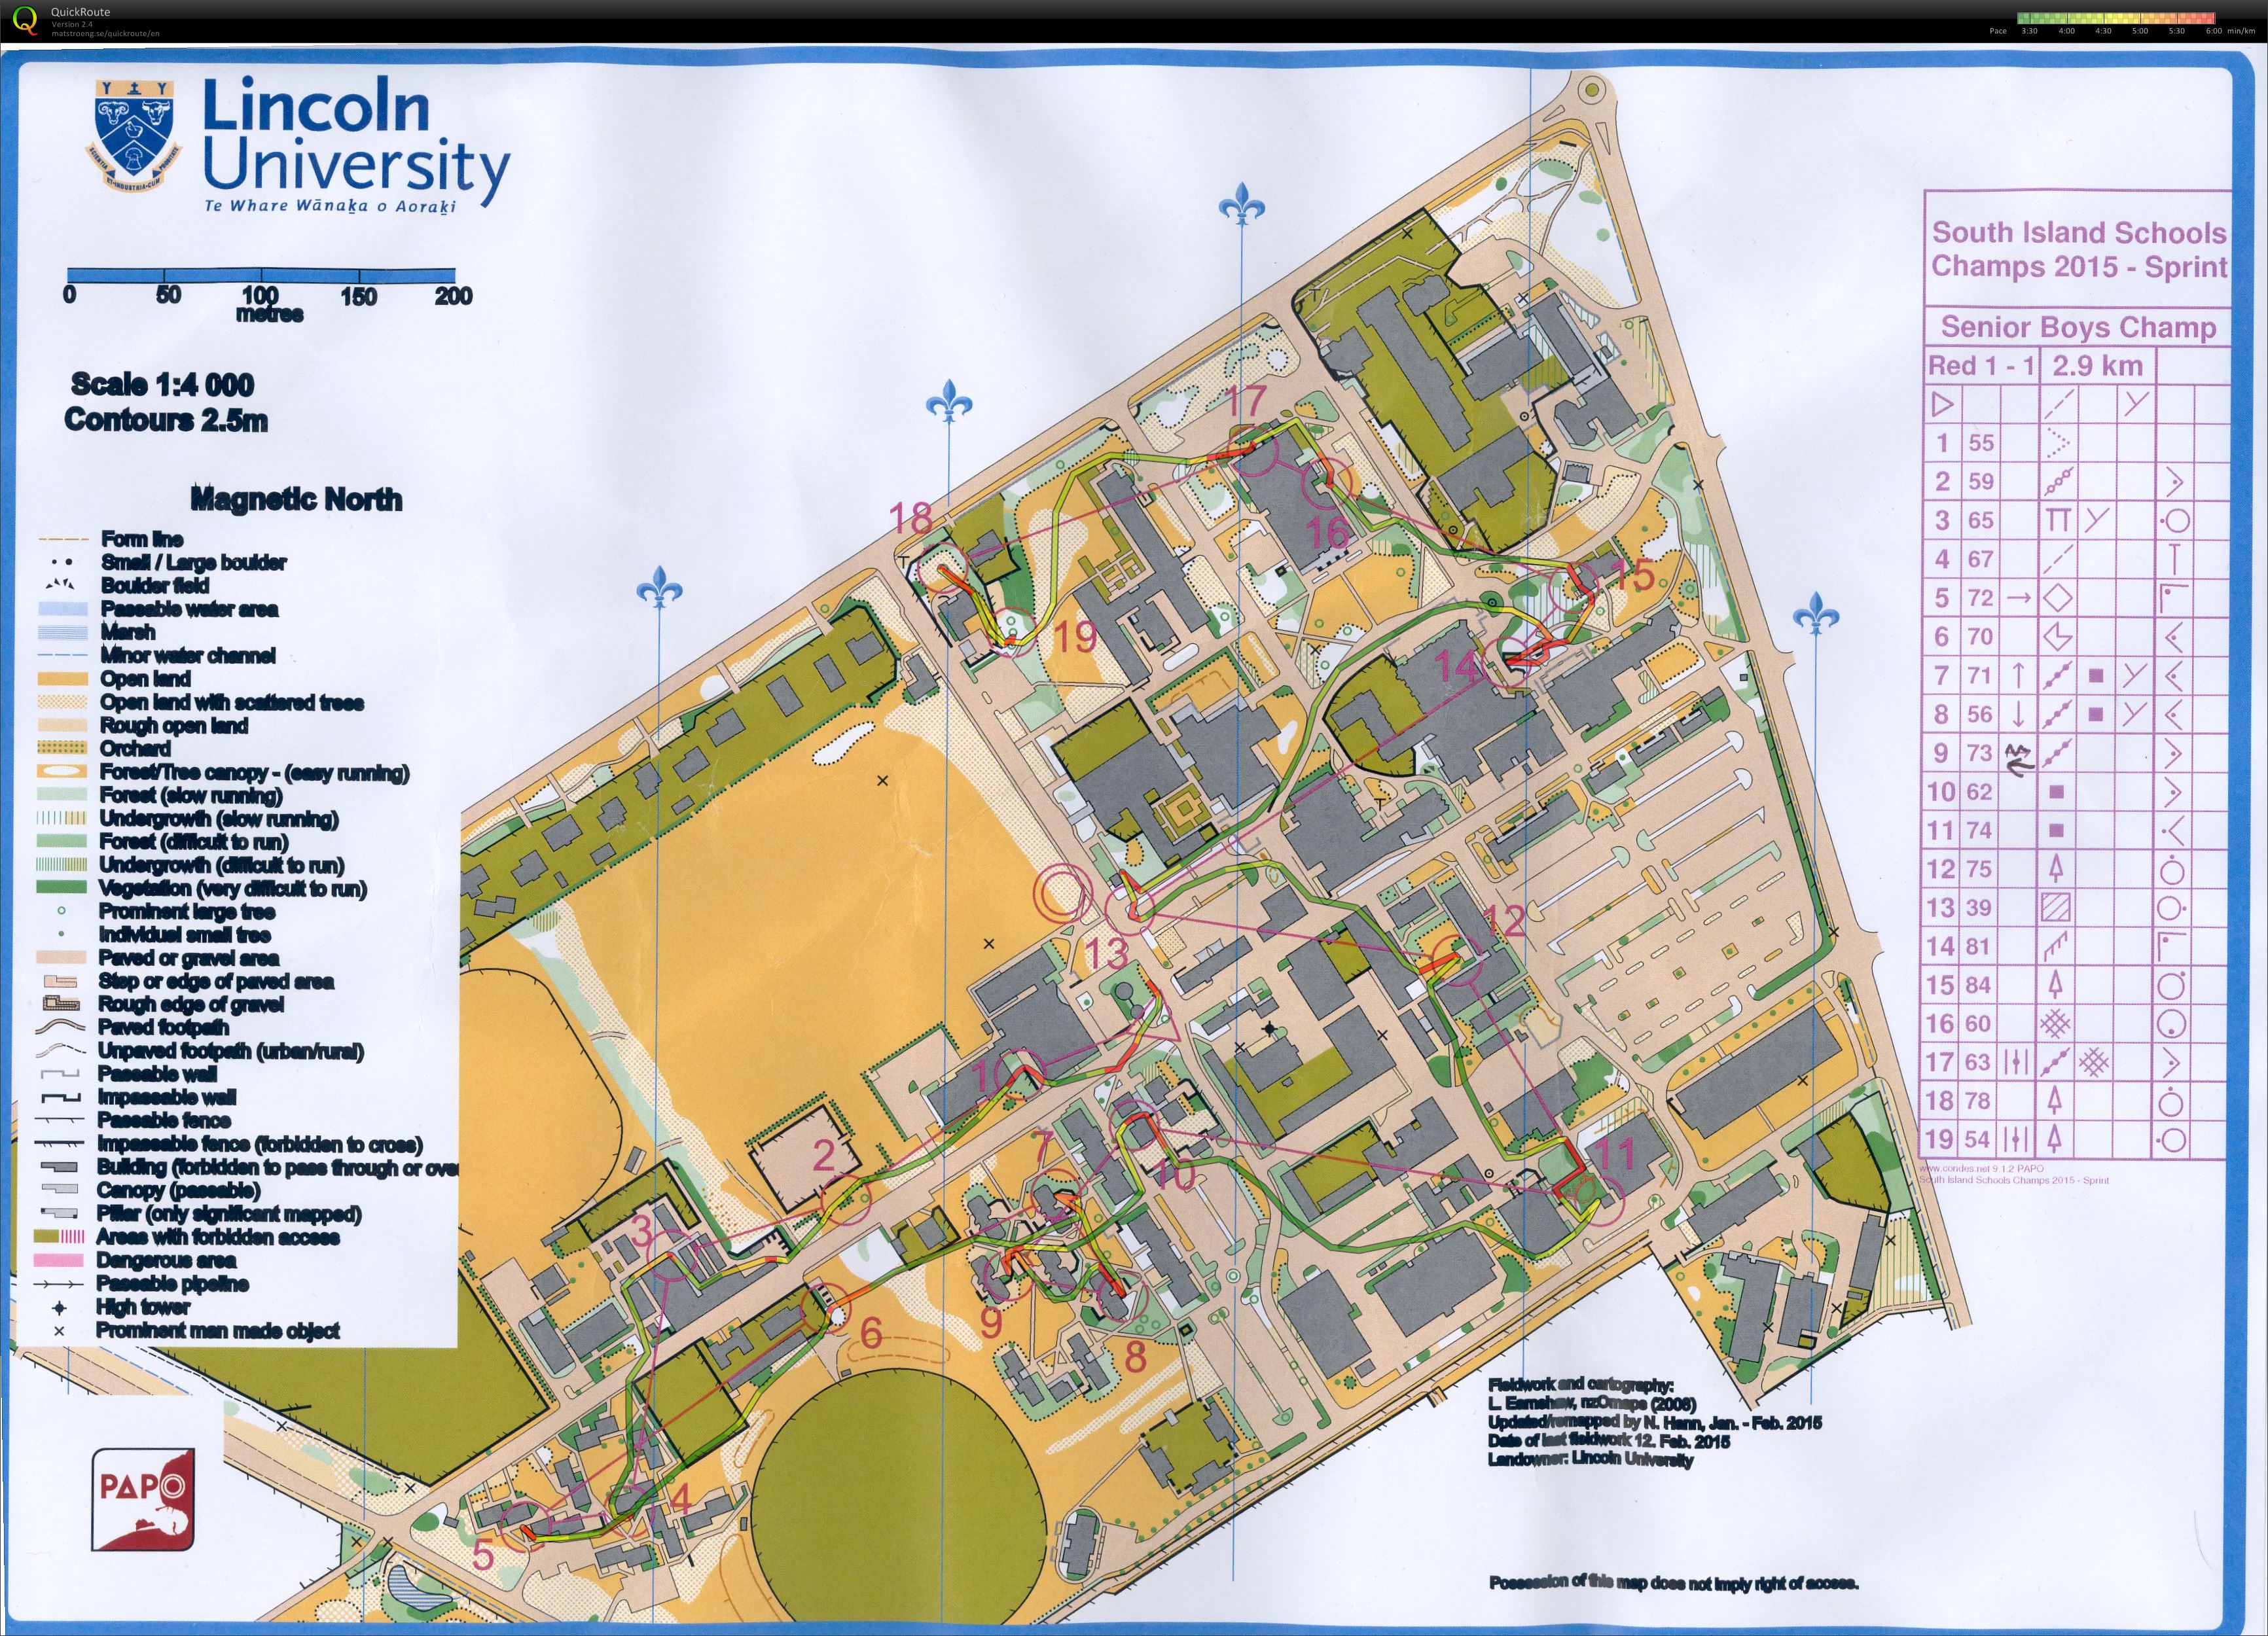 SISS Sprint Champs - Map 1 (19-04-2015)